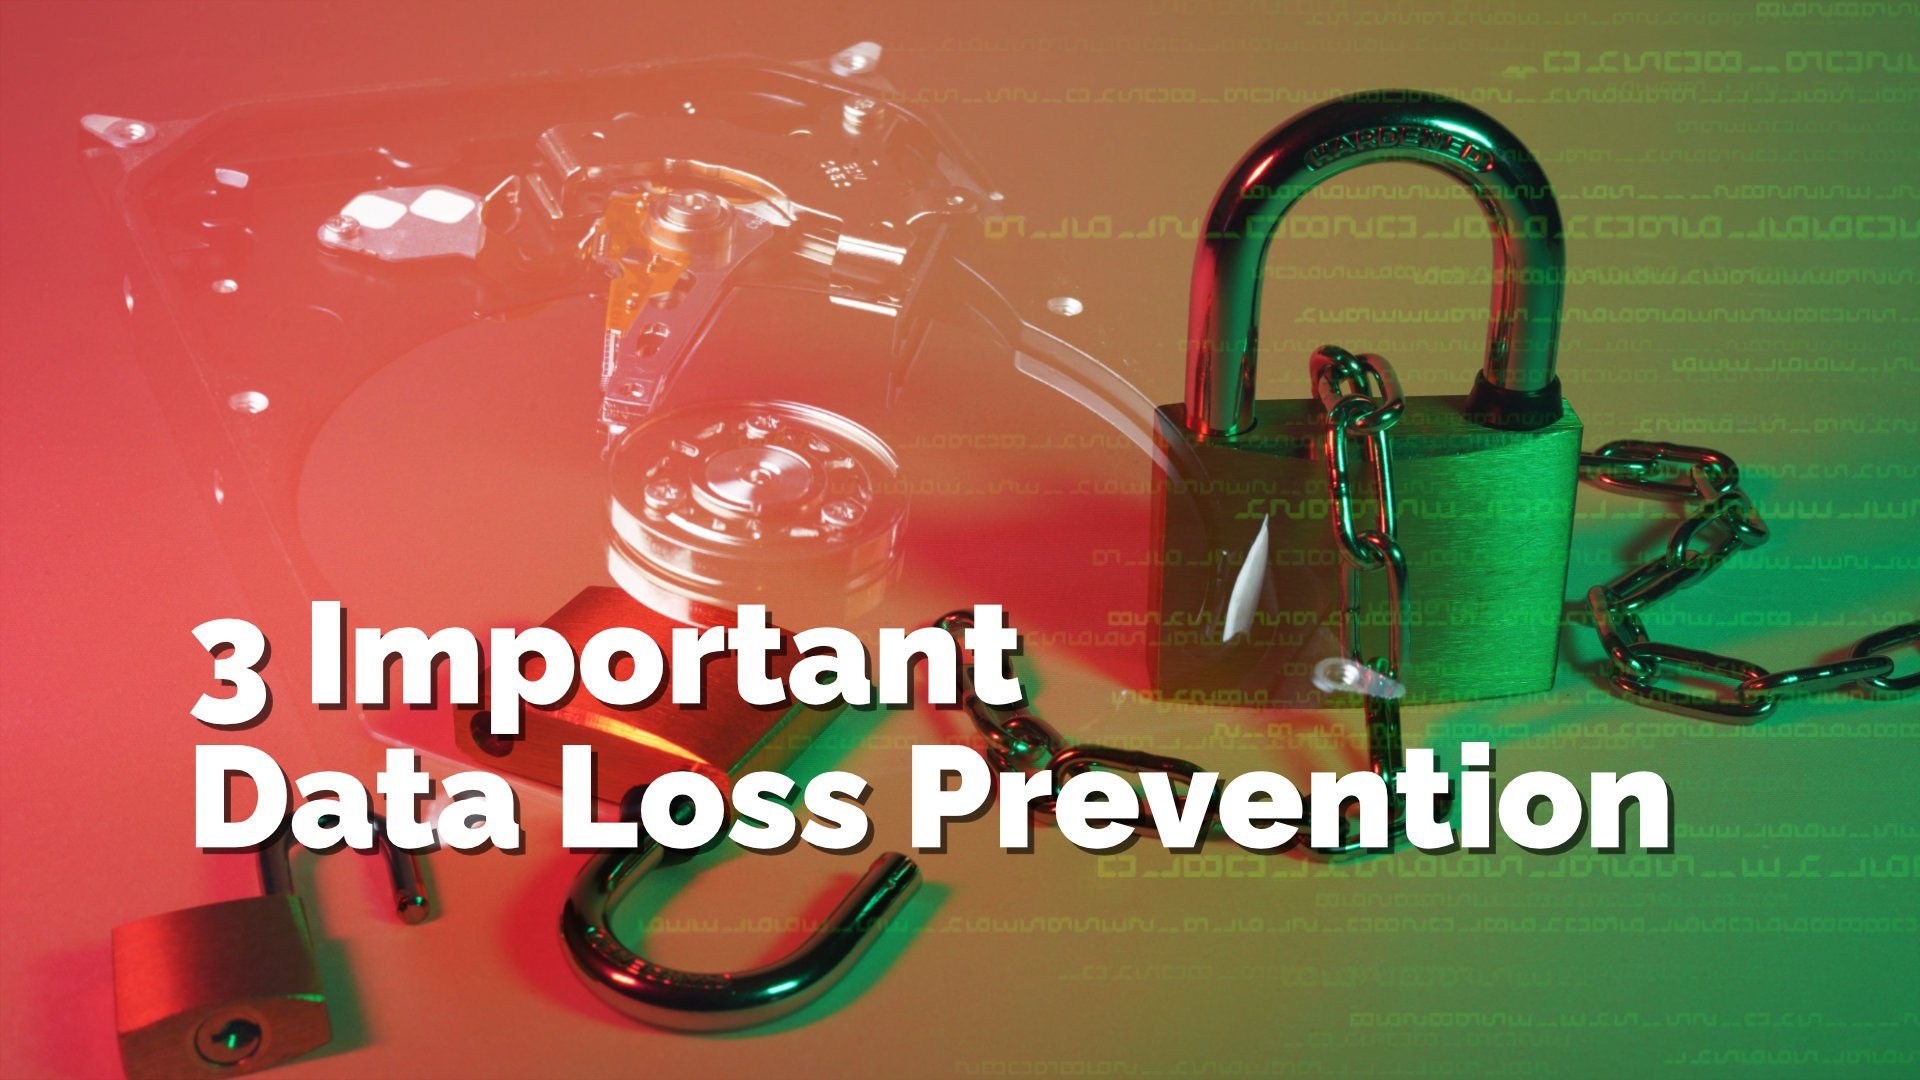 3 Important Data Loss Prevention Tips For Small Business Owners